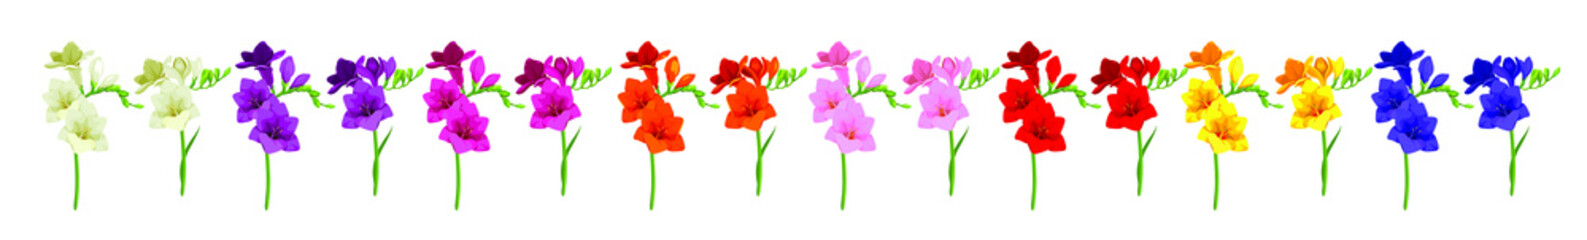 Beautiful multi-colored freesia flower. Many colors. Print for textile